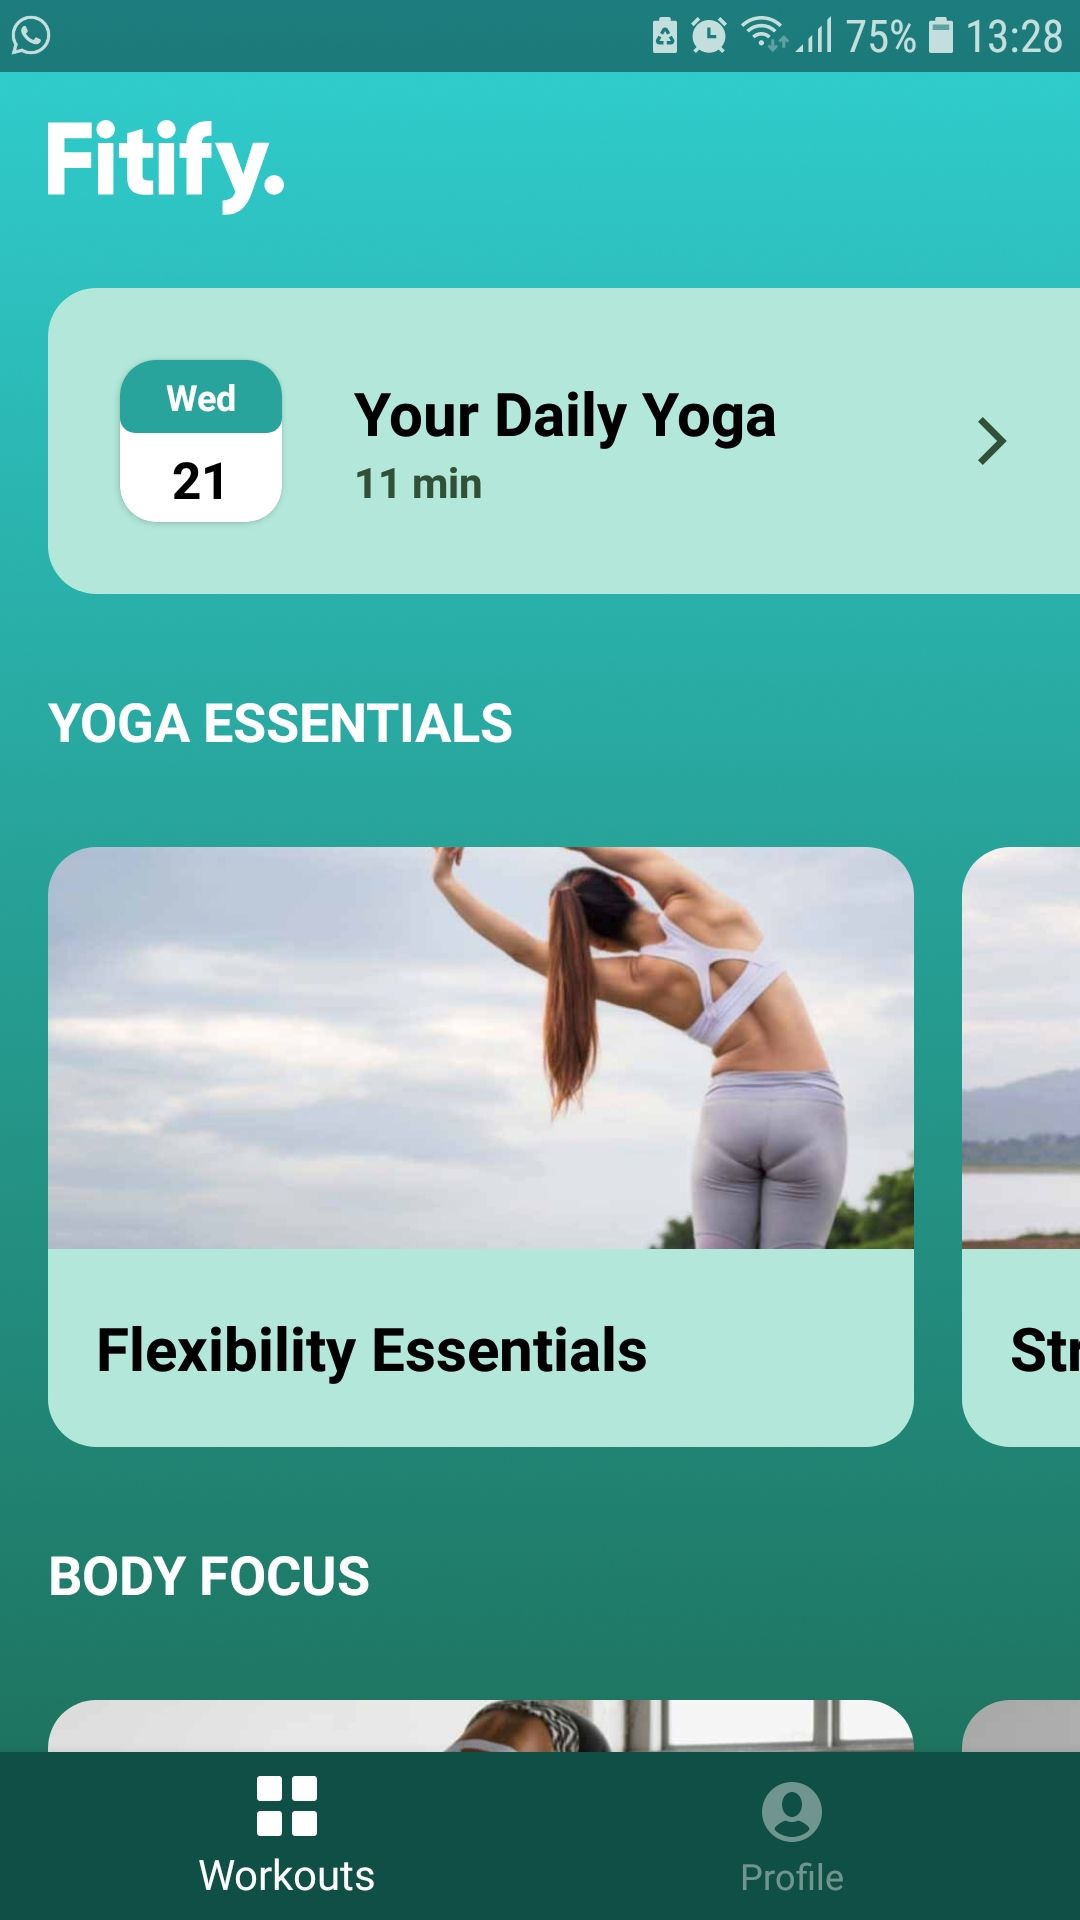 Fitify Yoga mobile yoga fitness app